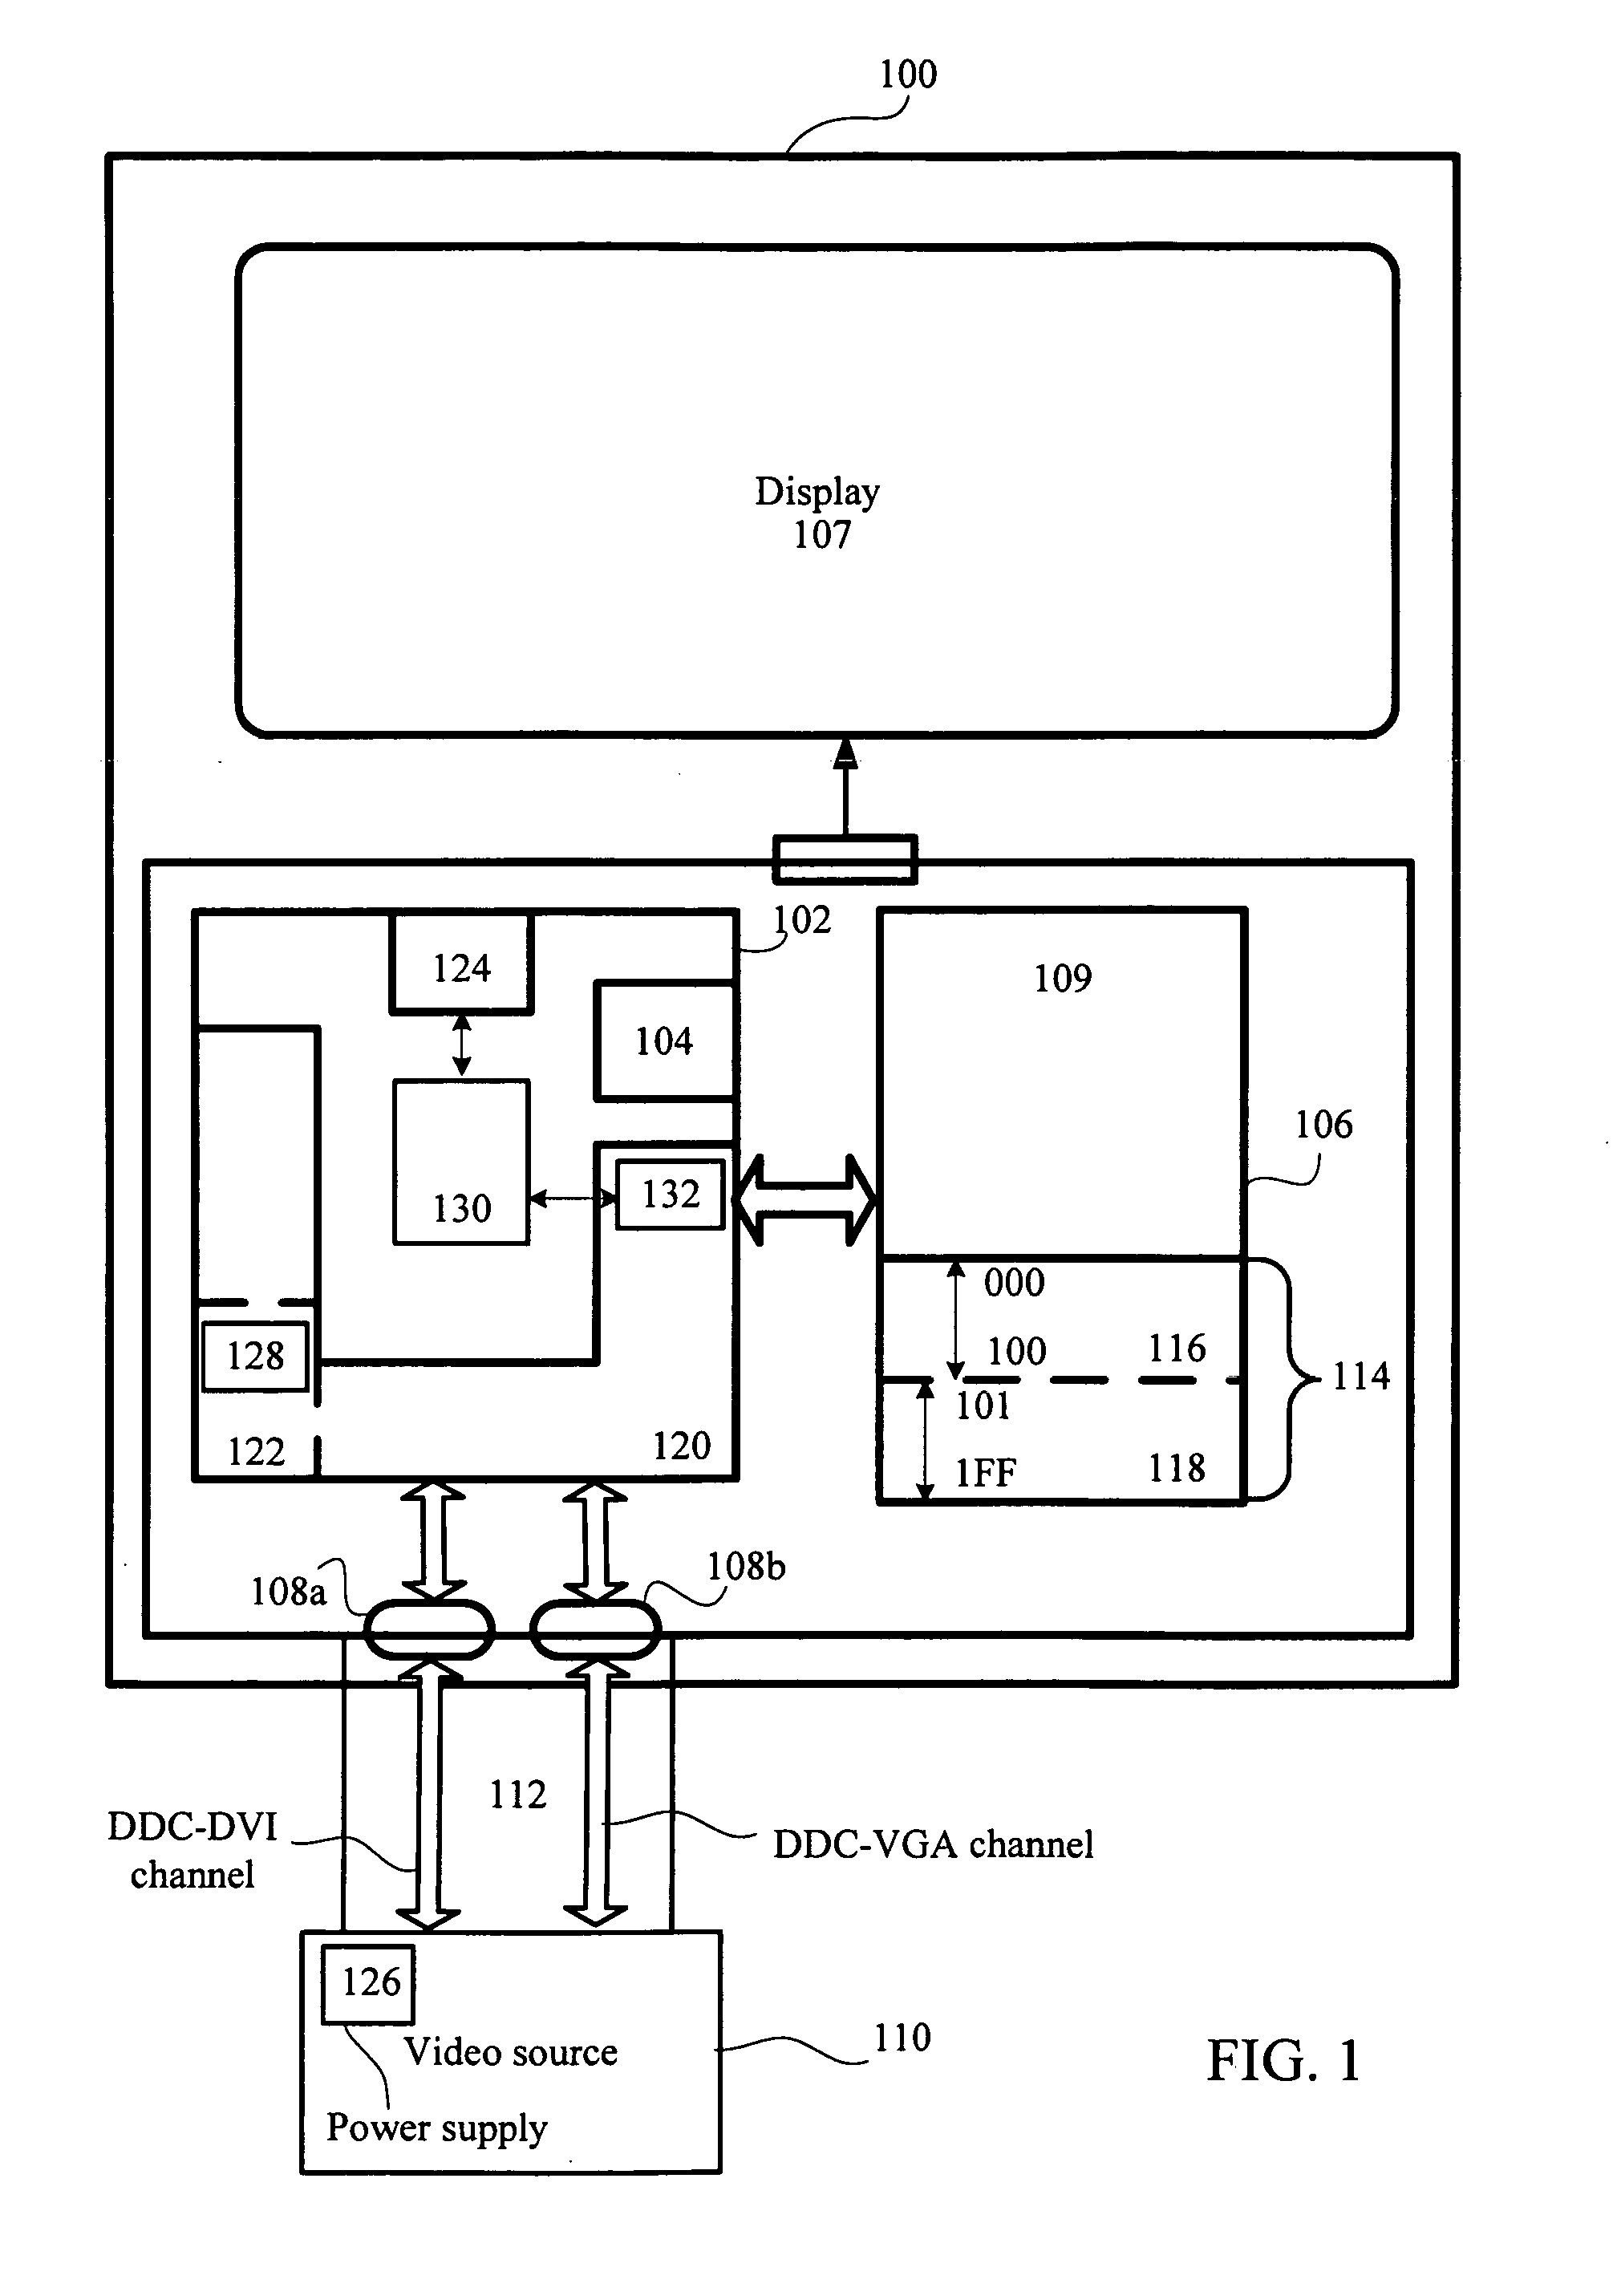 Acquisition of extended display identification data (EDID) in a display controller in a power up mode from a power down mode